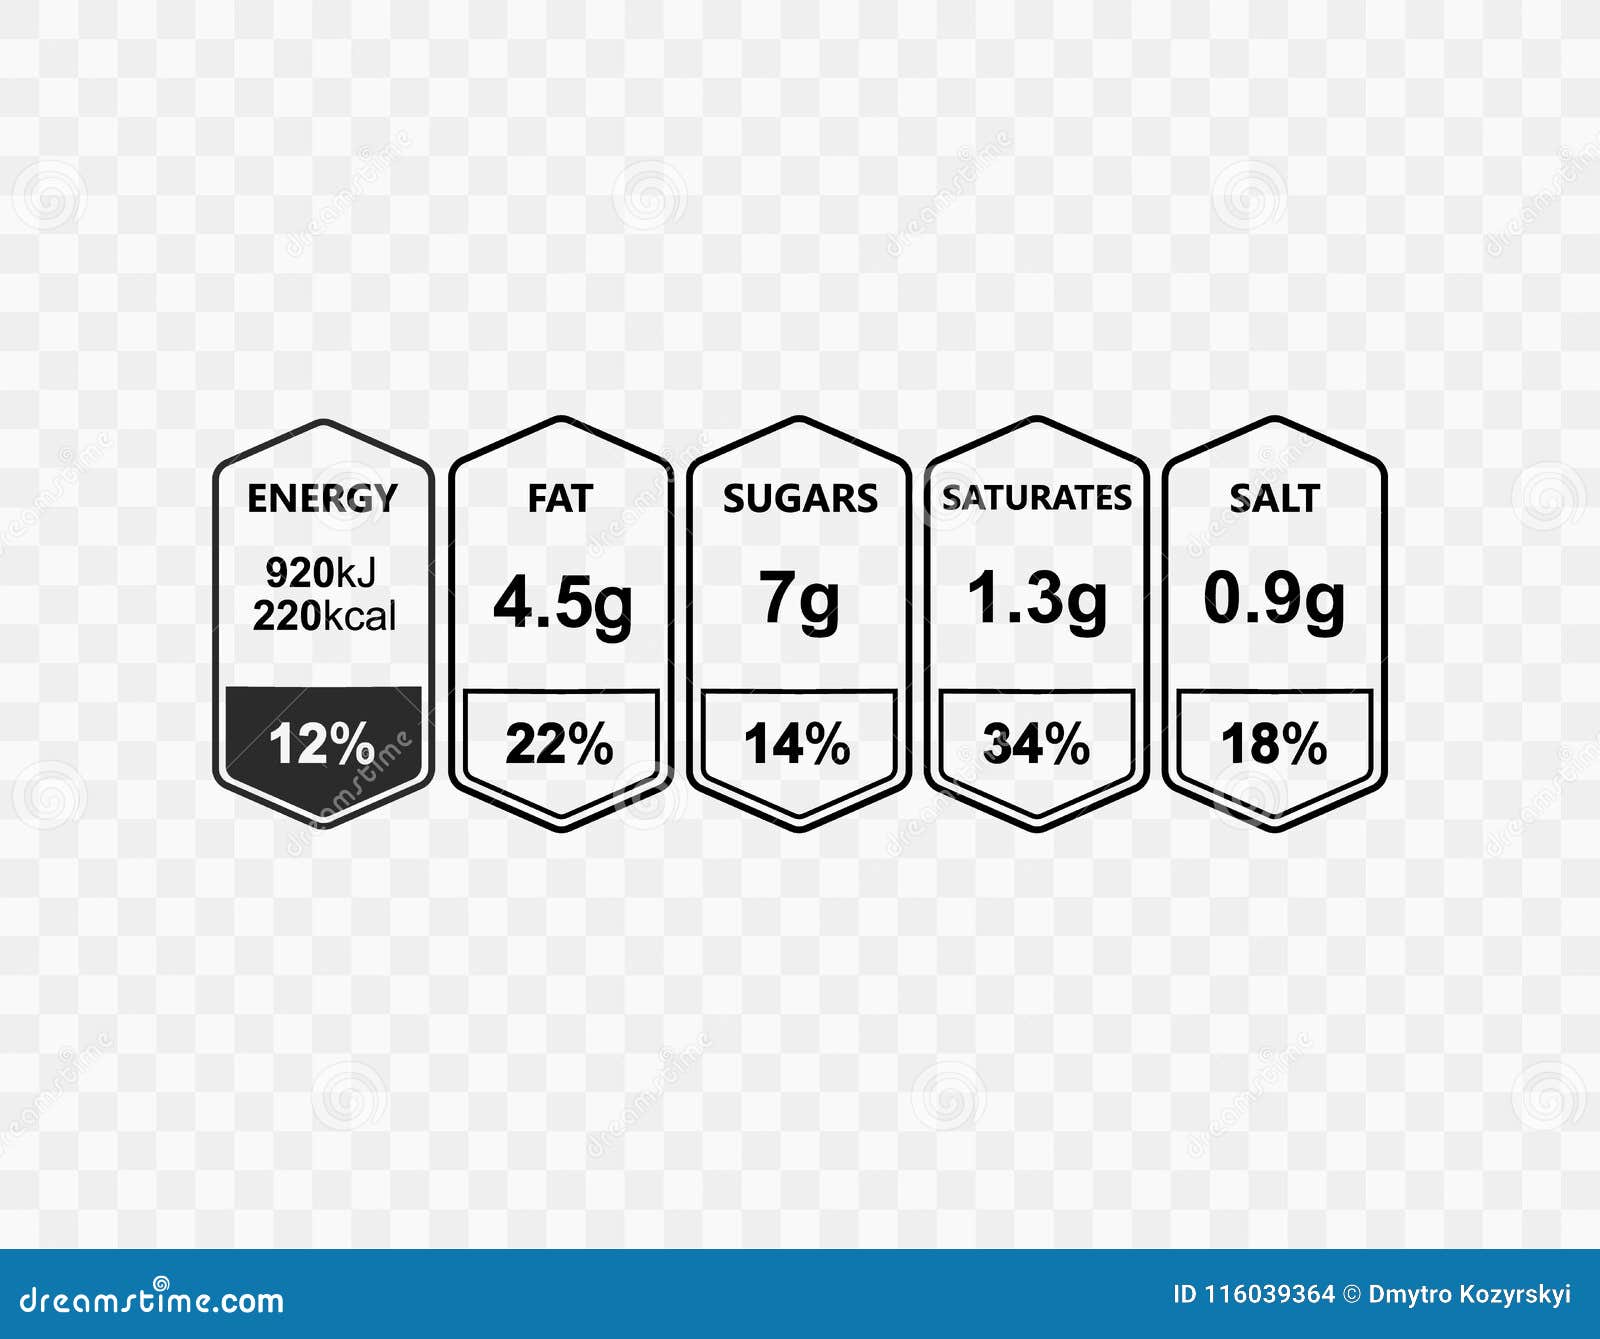 nutrition facts information label for box. daily value ingredient calories, cholesterol and fats in grams and percent